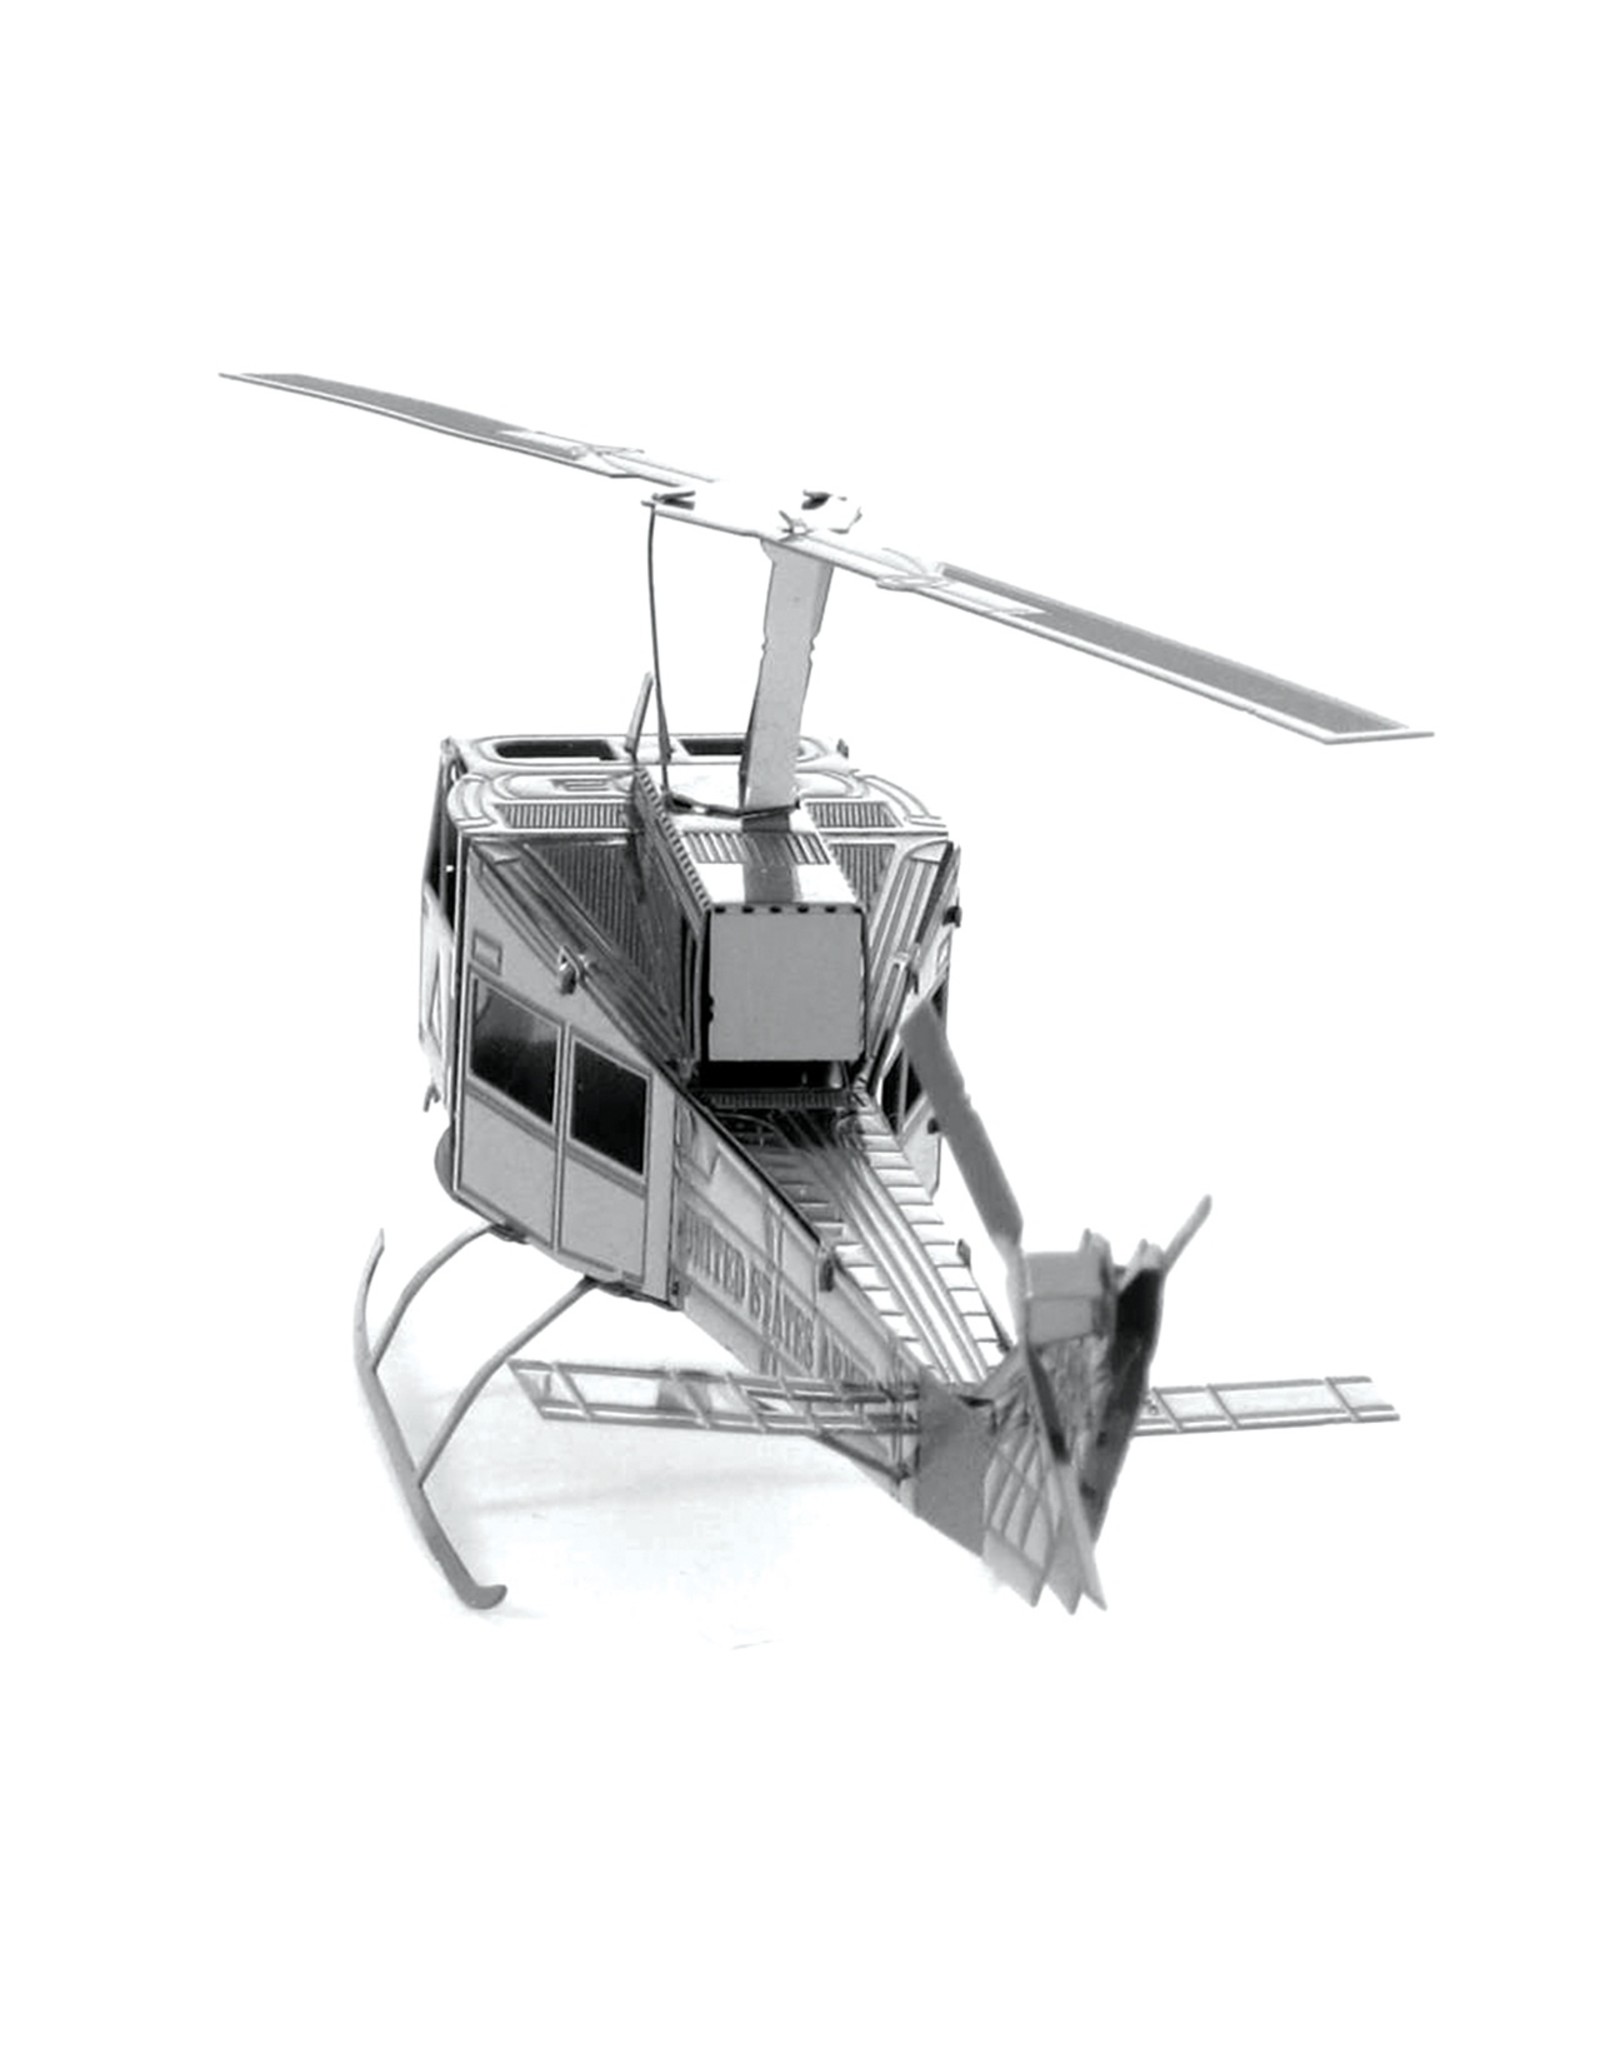 Details about   Metal Earth Fascinations Huey UH-1 Helicopter 3D Metal Model Kit